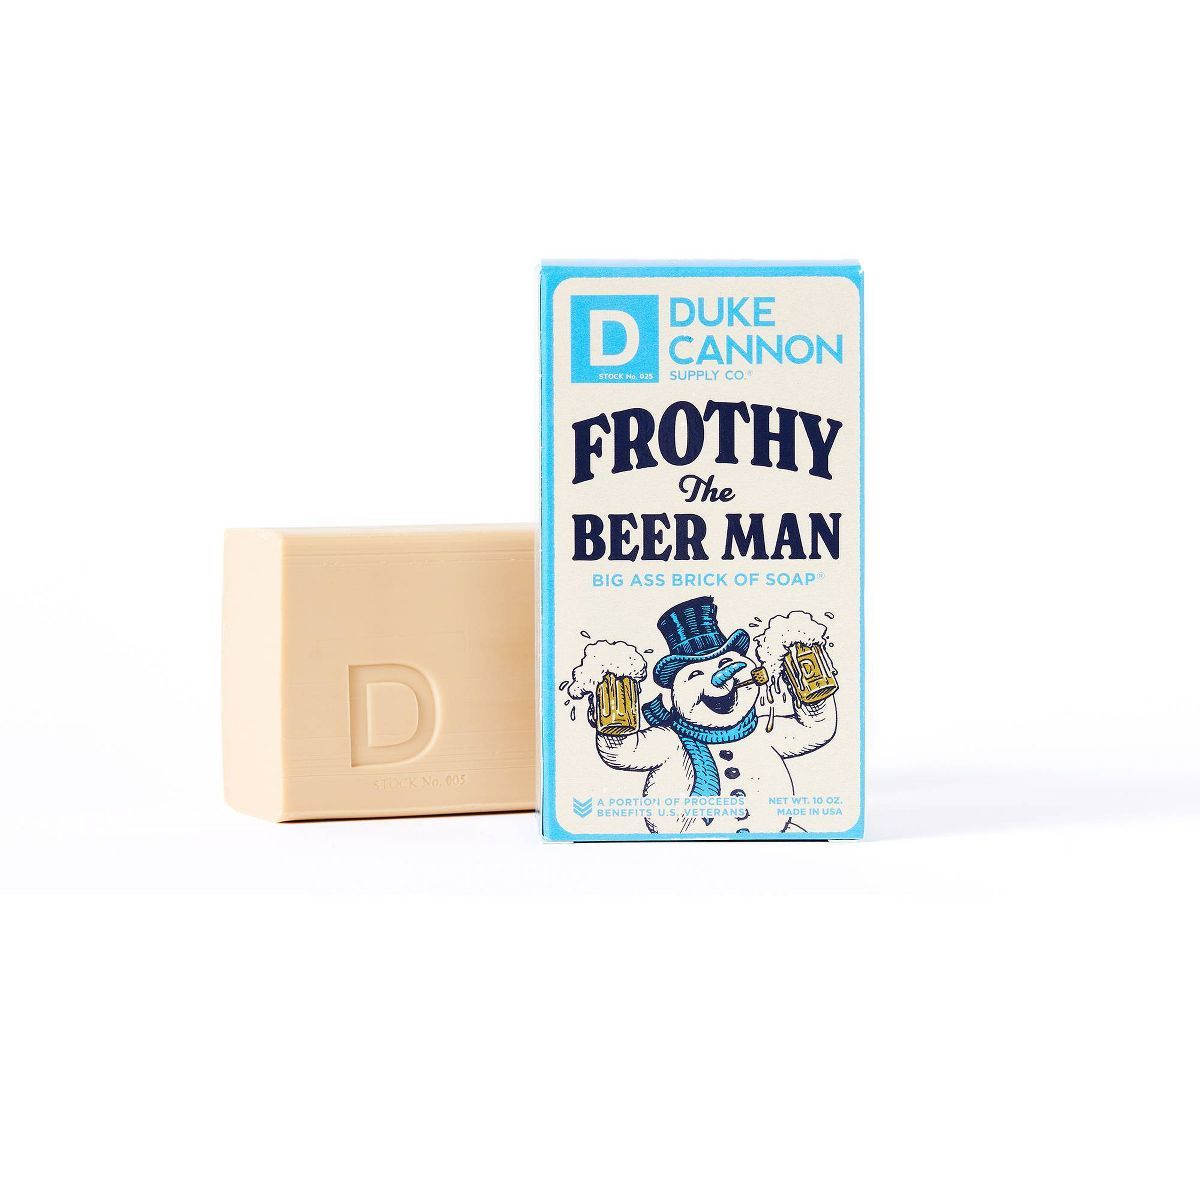 Duke Cannon Supply Co. Frothy the Beer Man Bar Soap - Sandalwood Scent - 10oz | Target